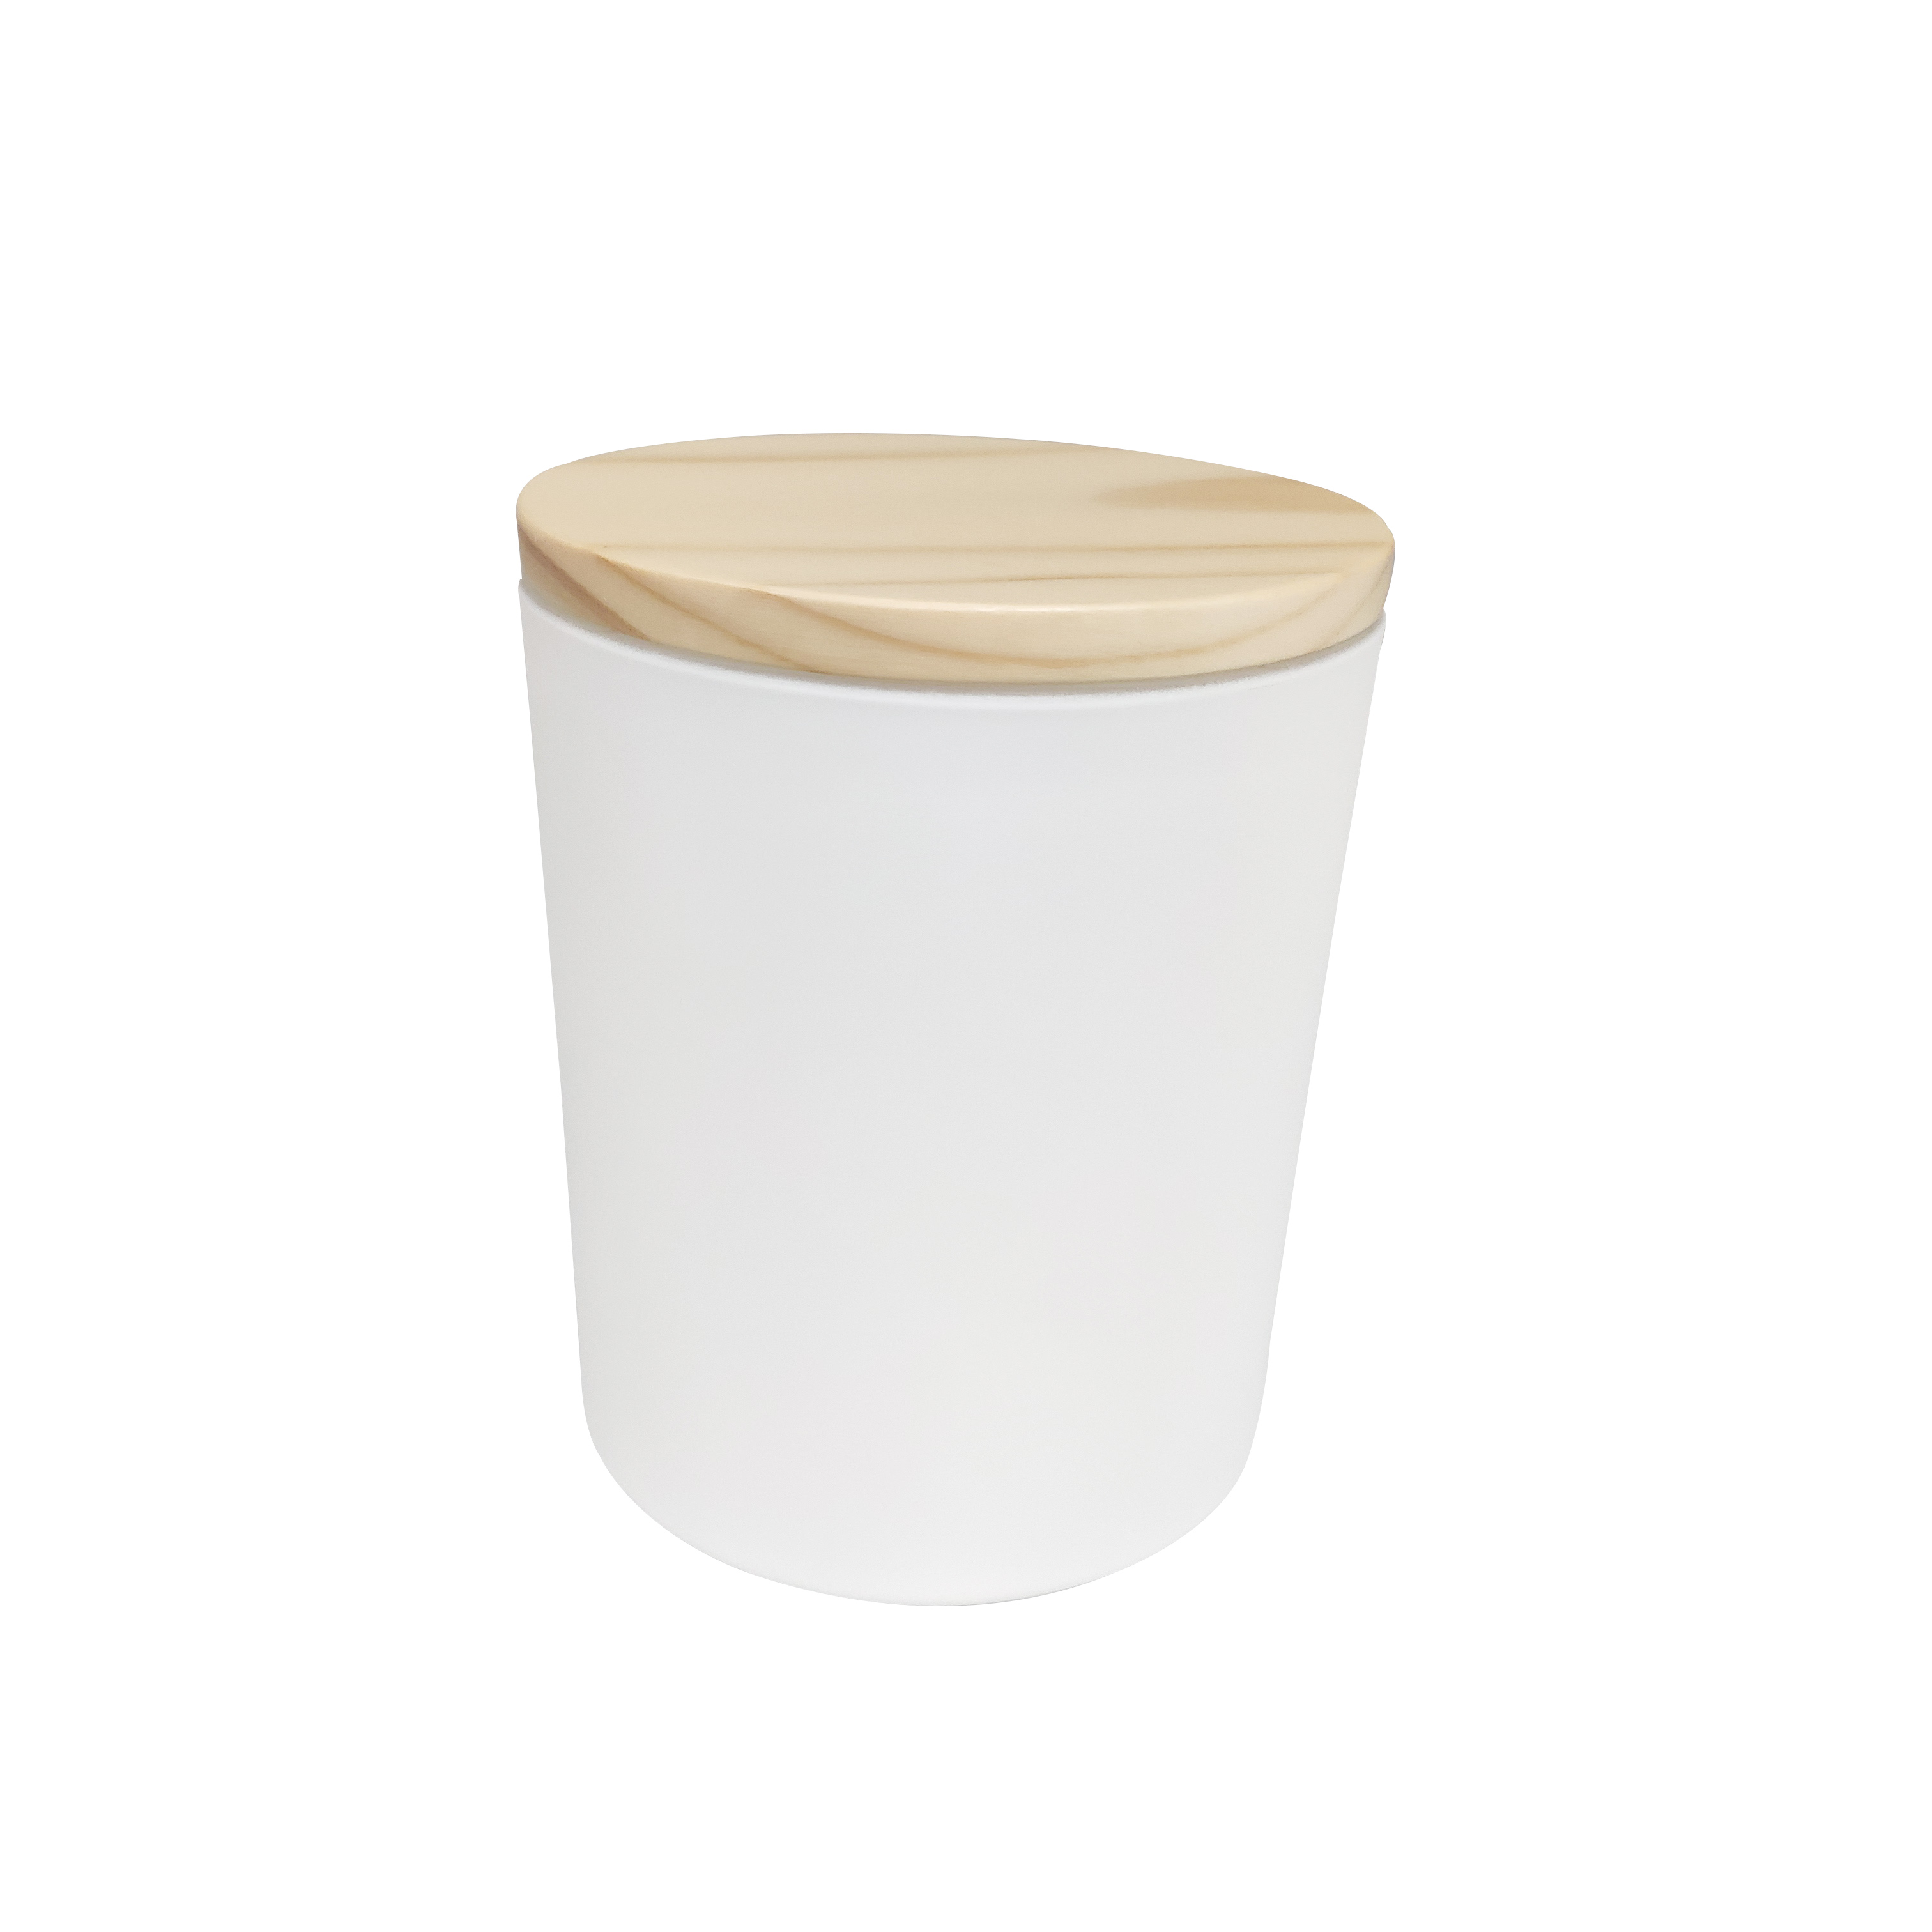 12oz white glasss candle jar with wood lid